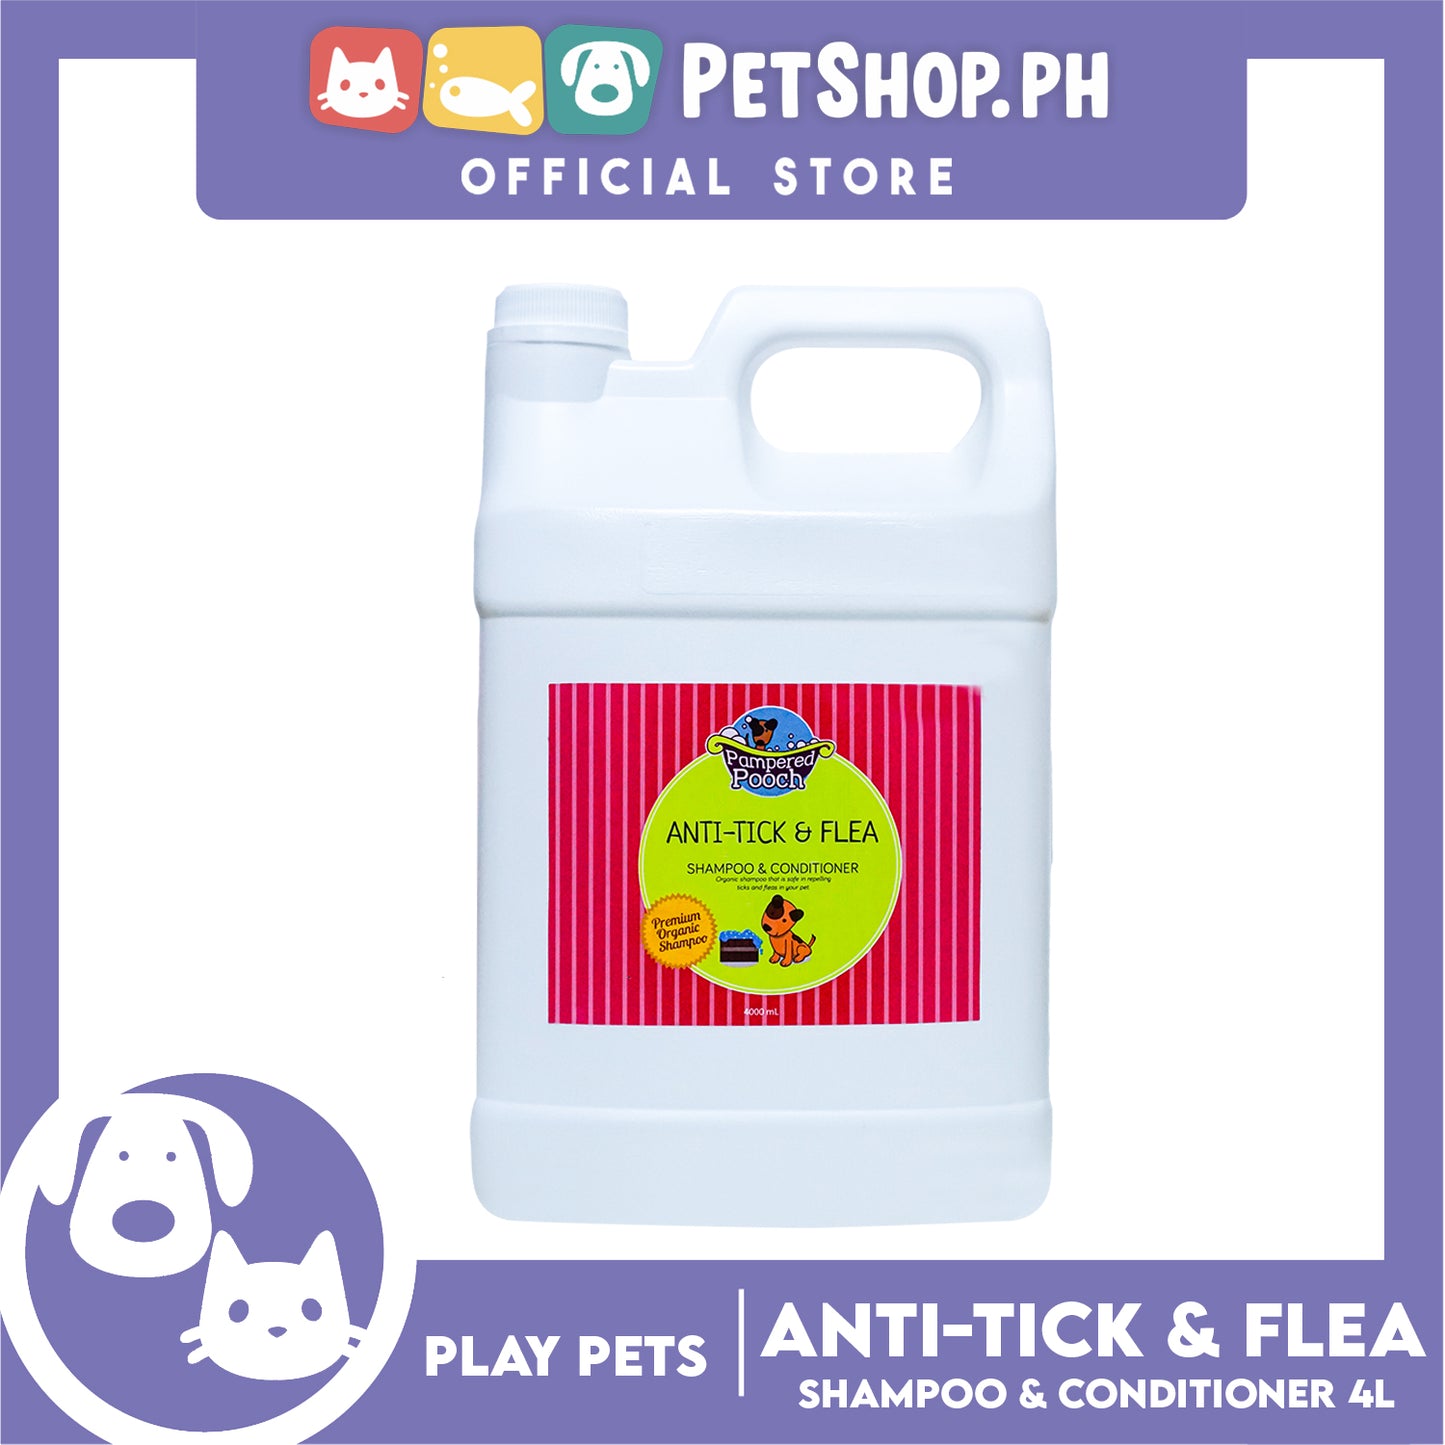 Play Pets Pampered Pooch Anti-Tick And Flea Shampoo And Conditioner 4000ml Premium Organic, Safe Repelling Ticks And Fleas In Your Pets